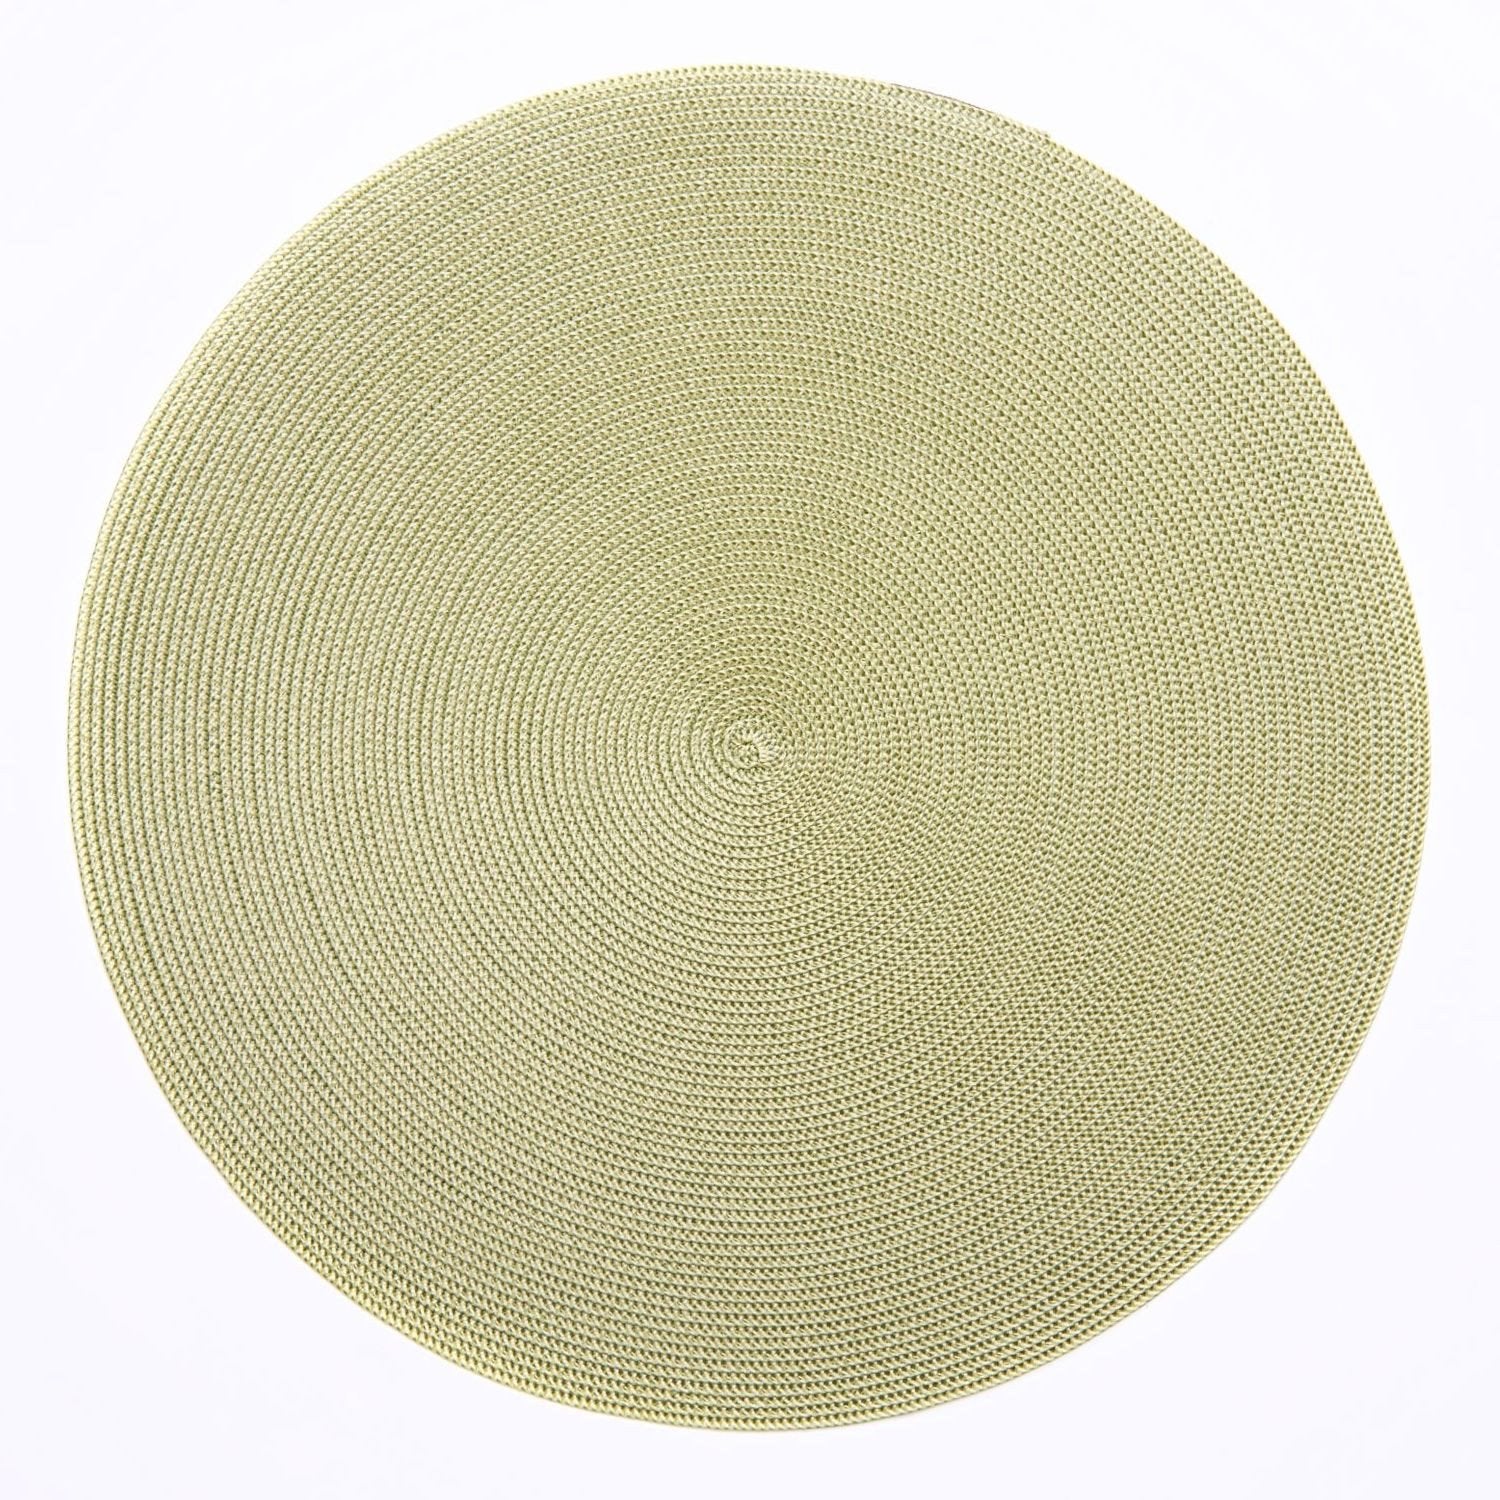 Indo 2-tone Scallop Oval Placemat Moss Canary